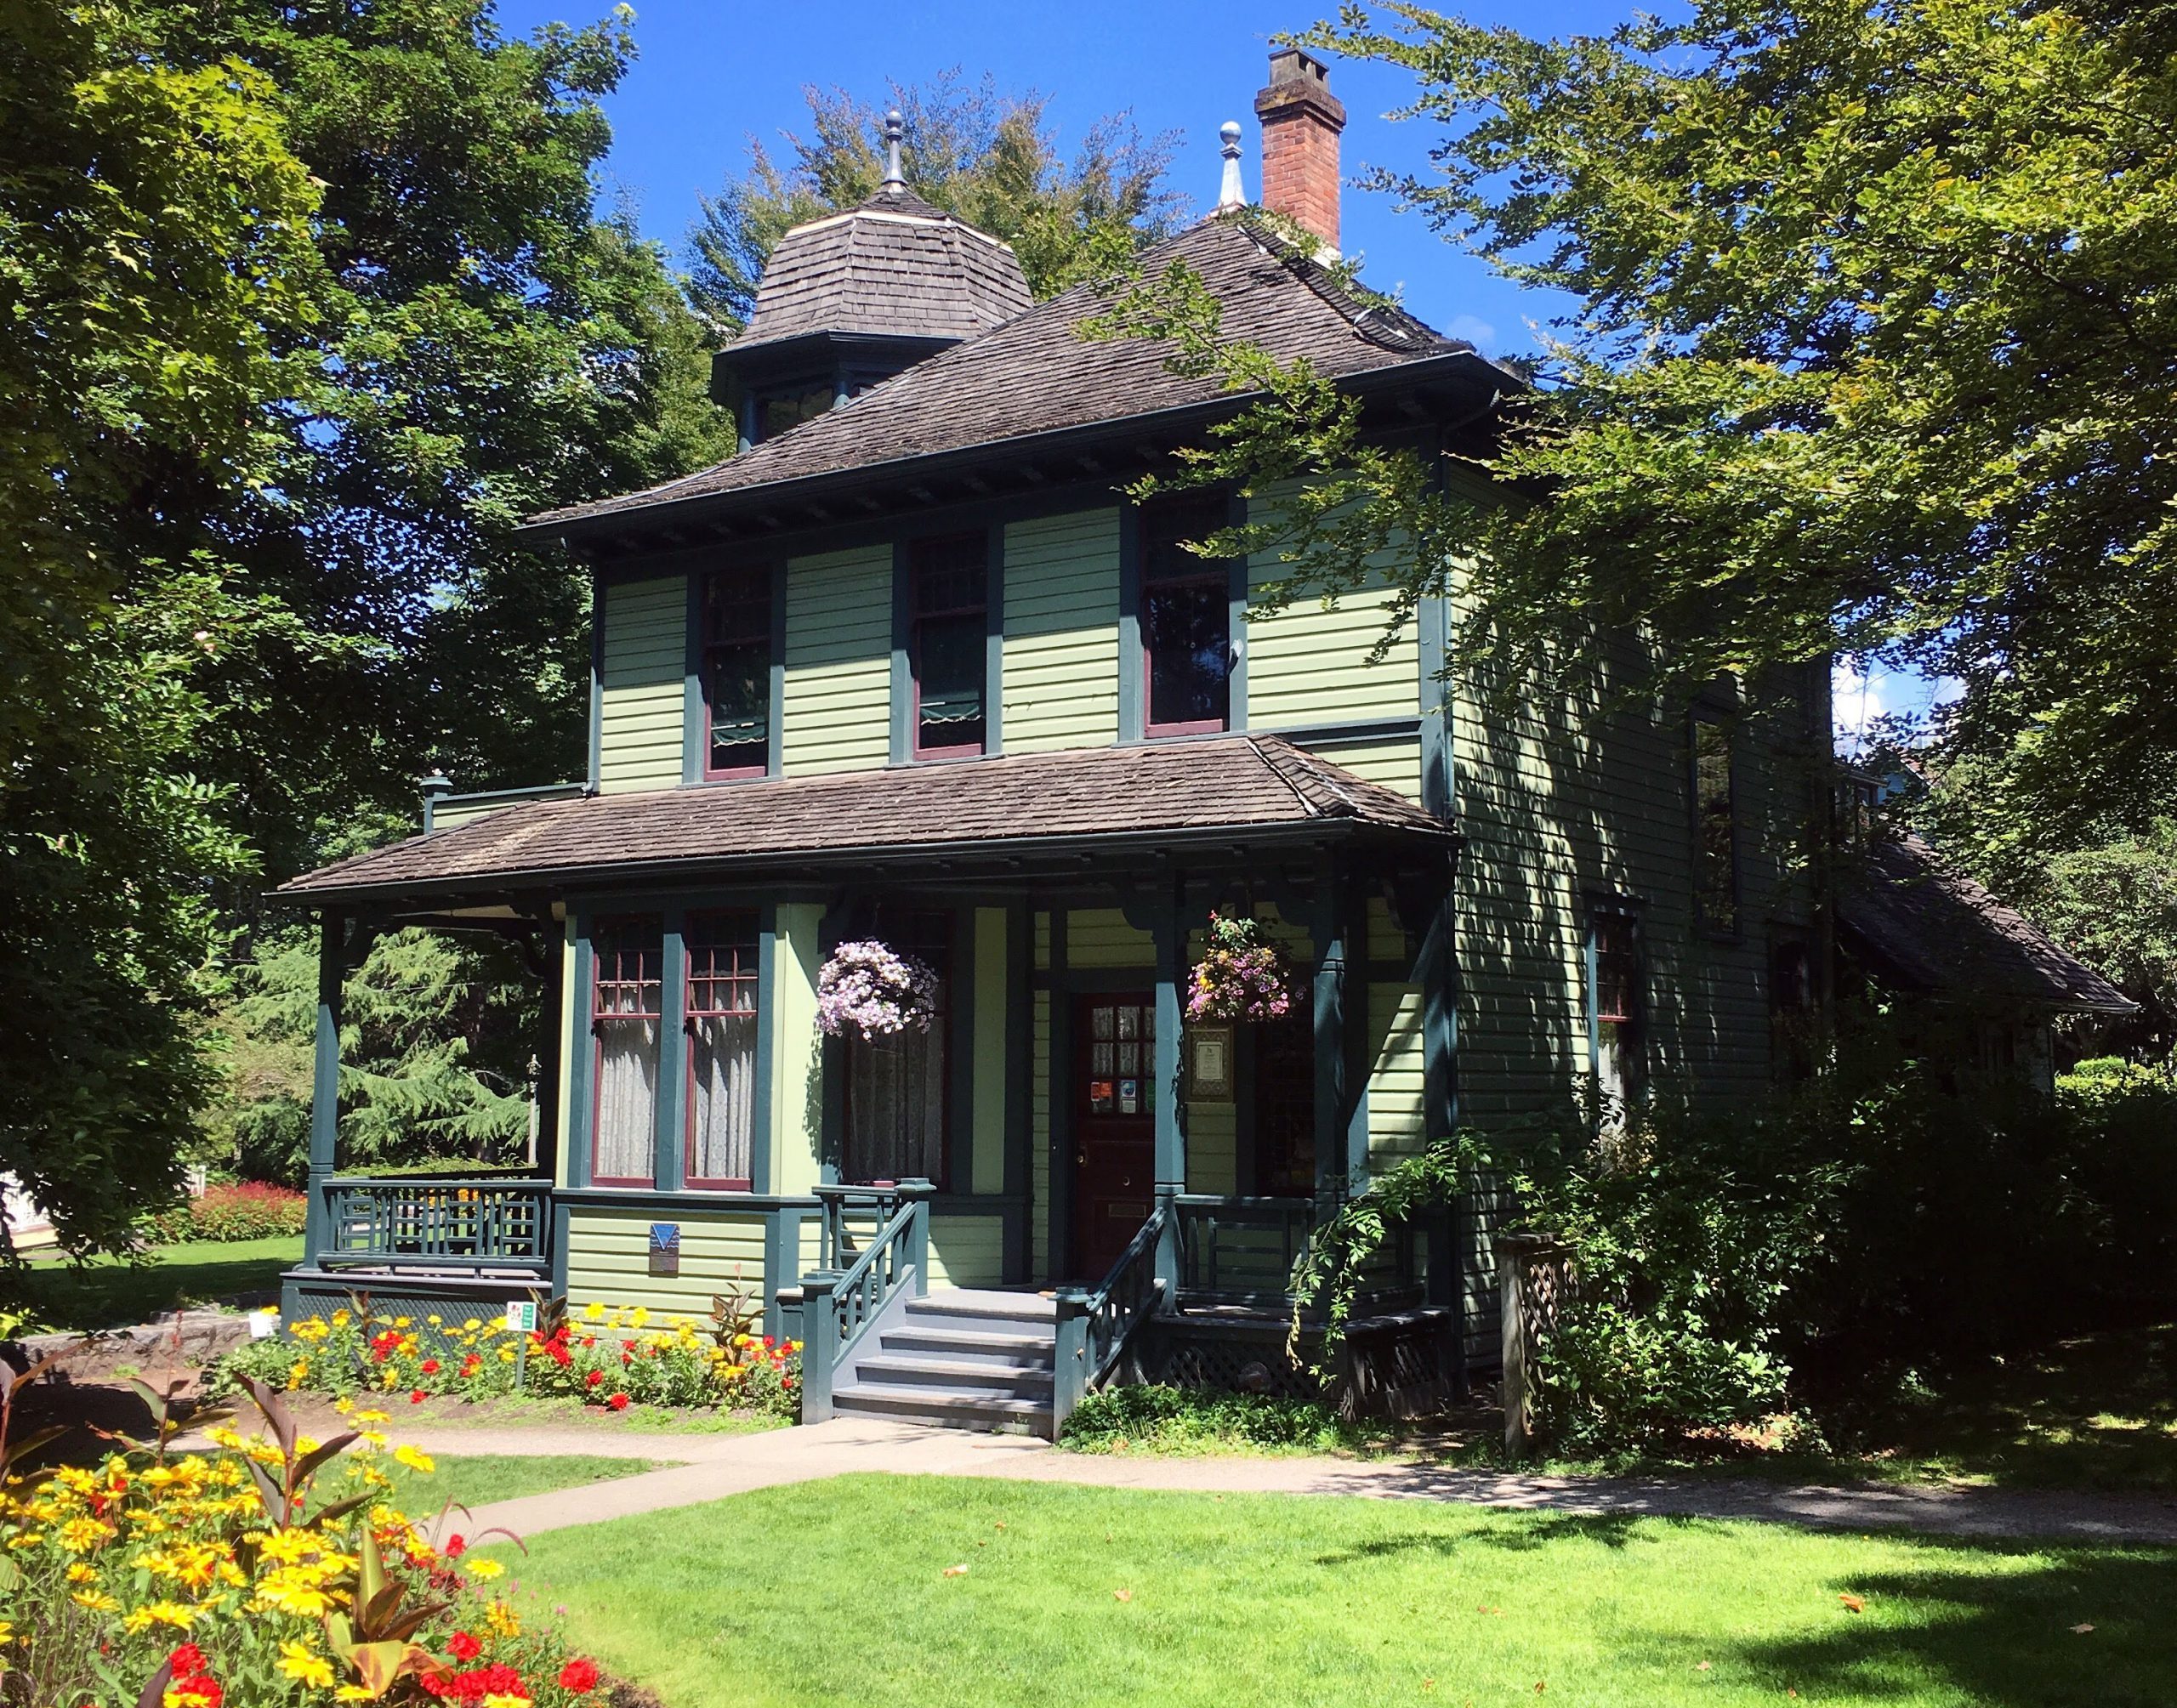 Image of the Roedde House Museam in the West End